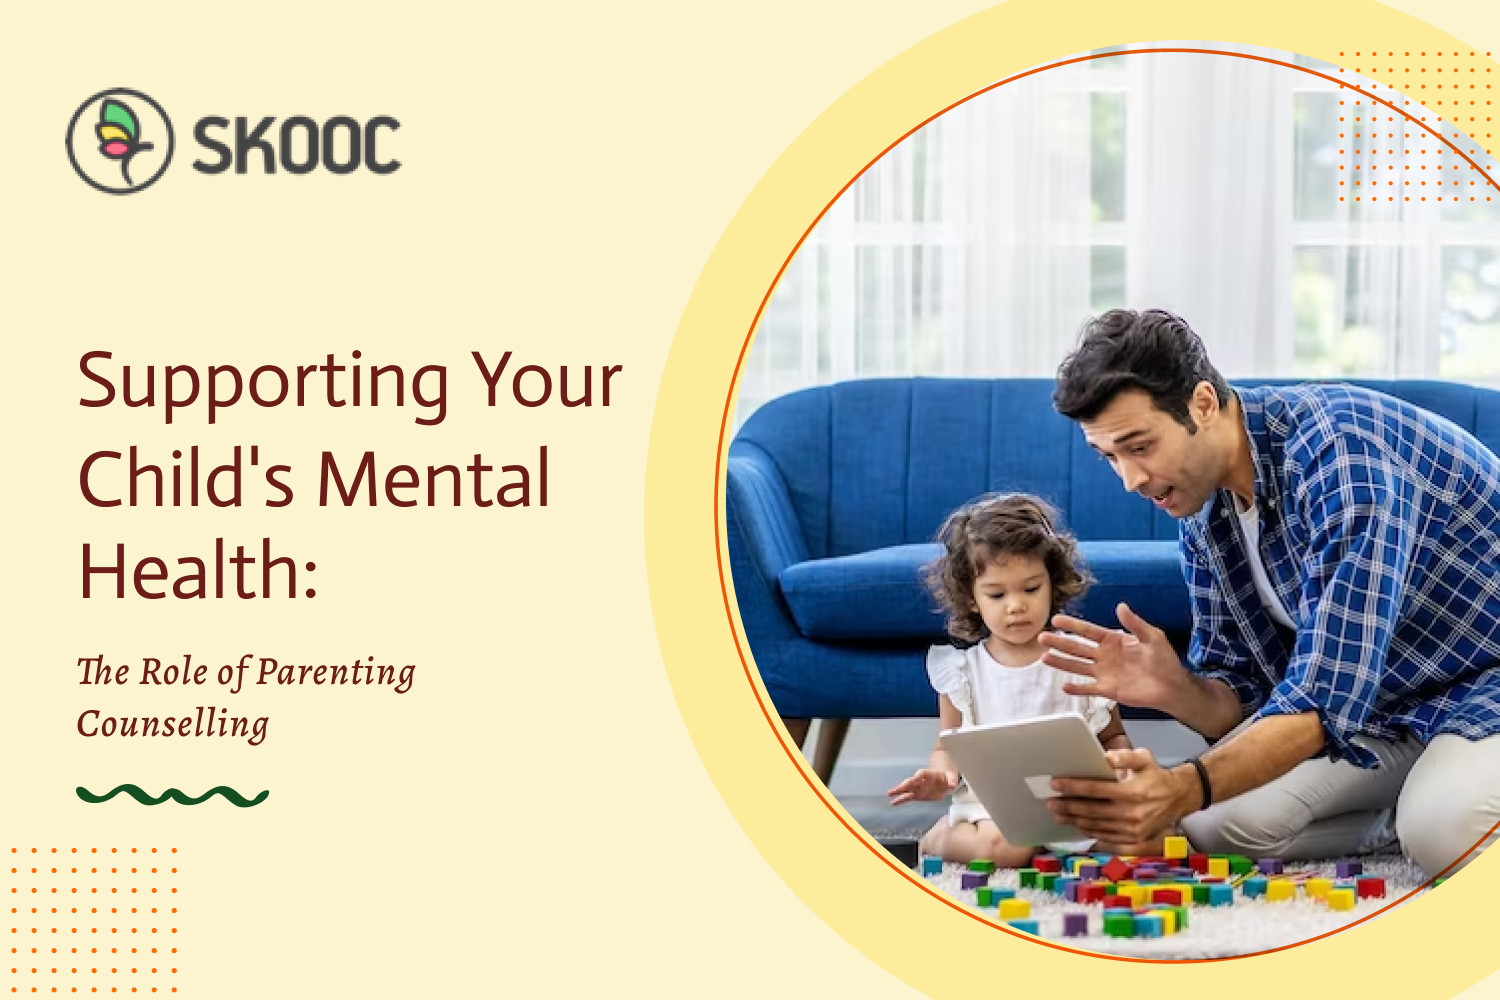 parenting counselling and supporting mental health